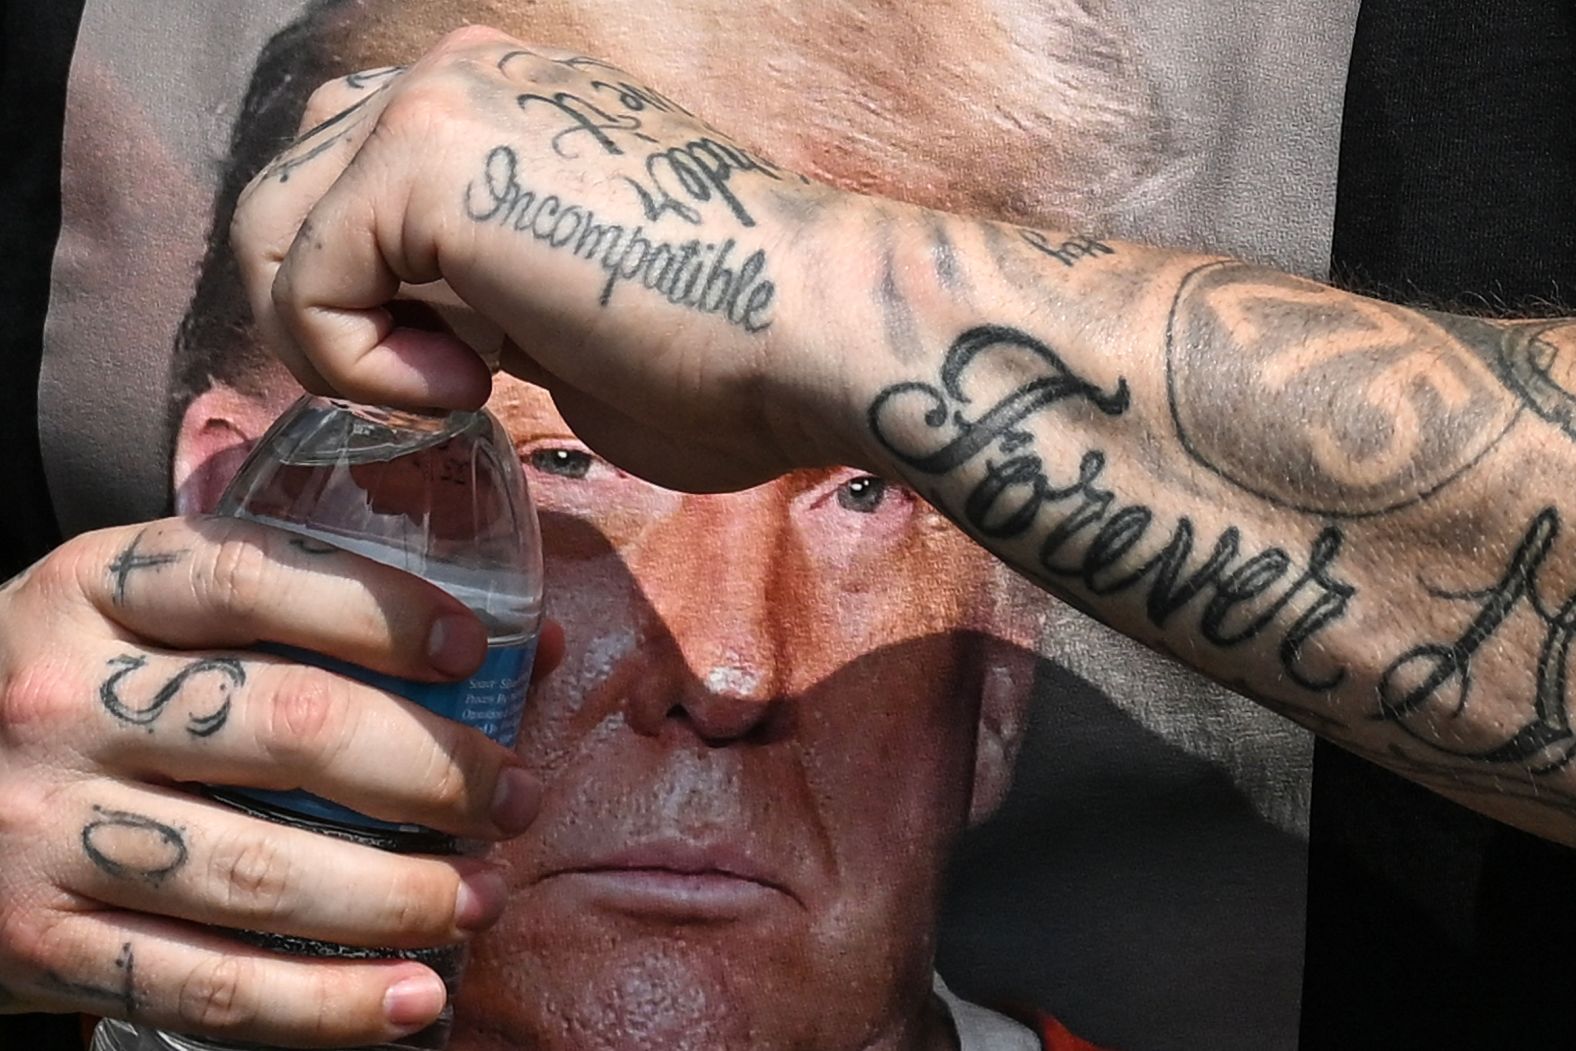 A photo of Trump is seen on a shirt as Trump supporters gathered near the jail Thursday.